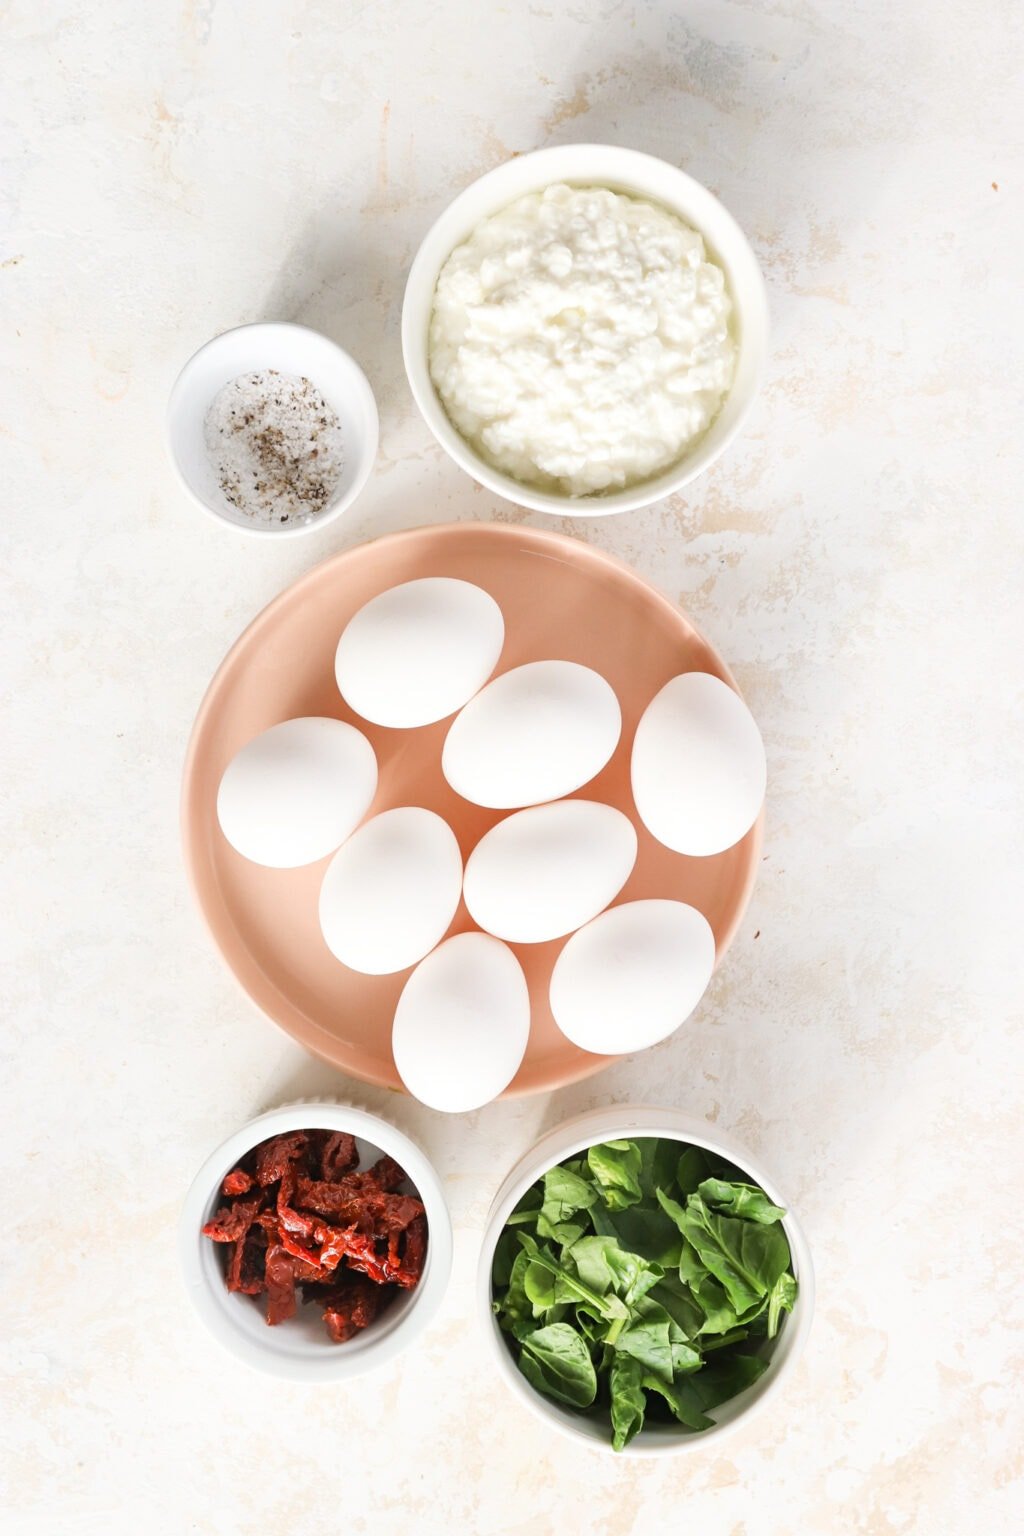 Ingredients for Egg Bites with Cottage Cheese, Spinach & Sun-dried Tomatoes, including eggs, cottage cheese, salt and pepper, spinach, sun-dried tomatoes